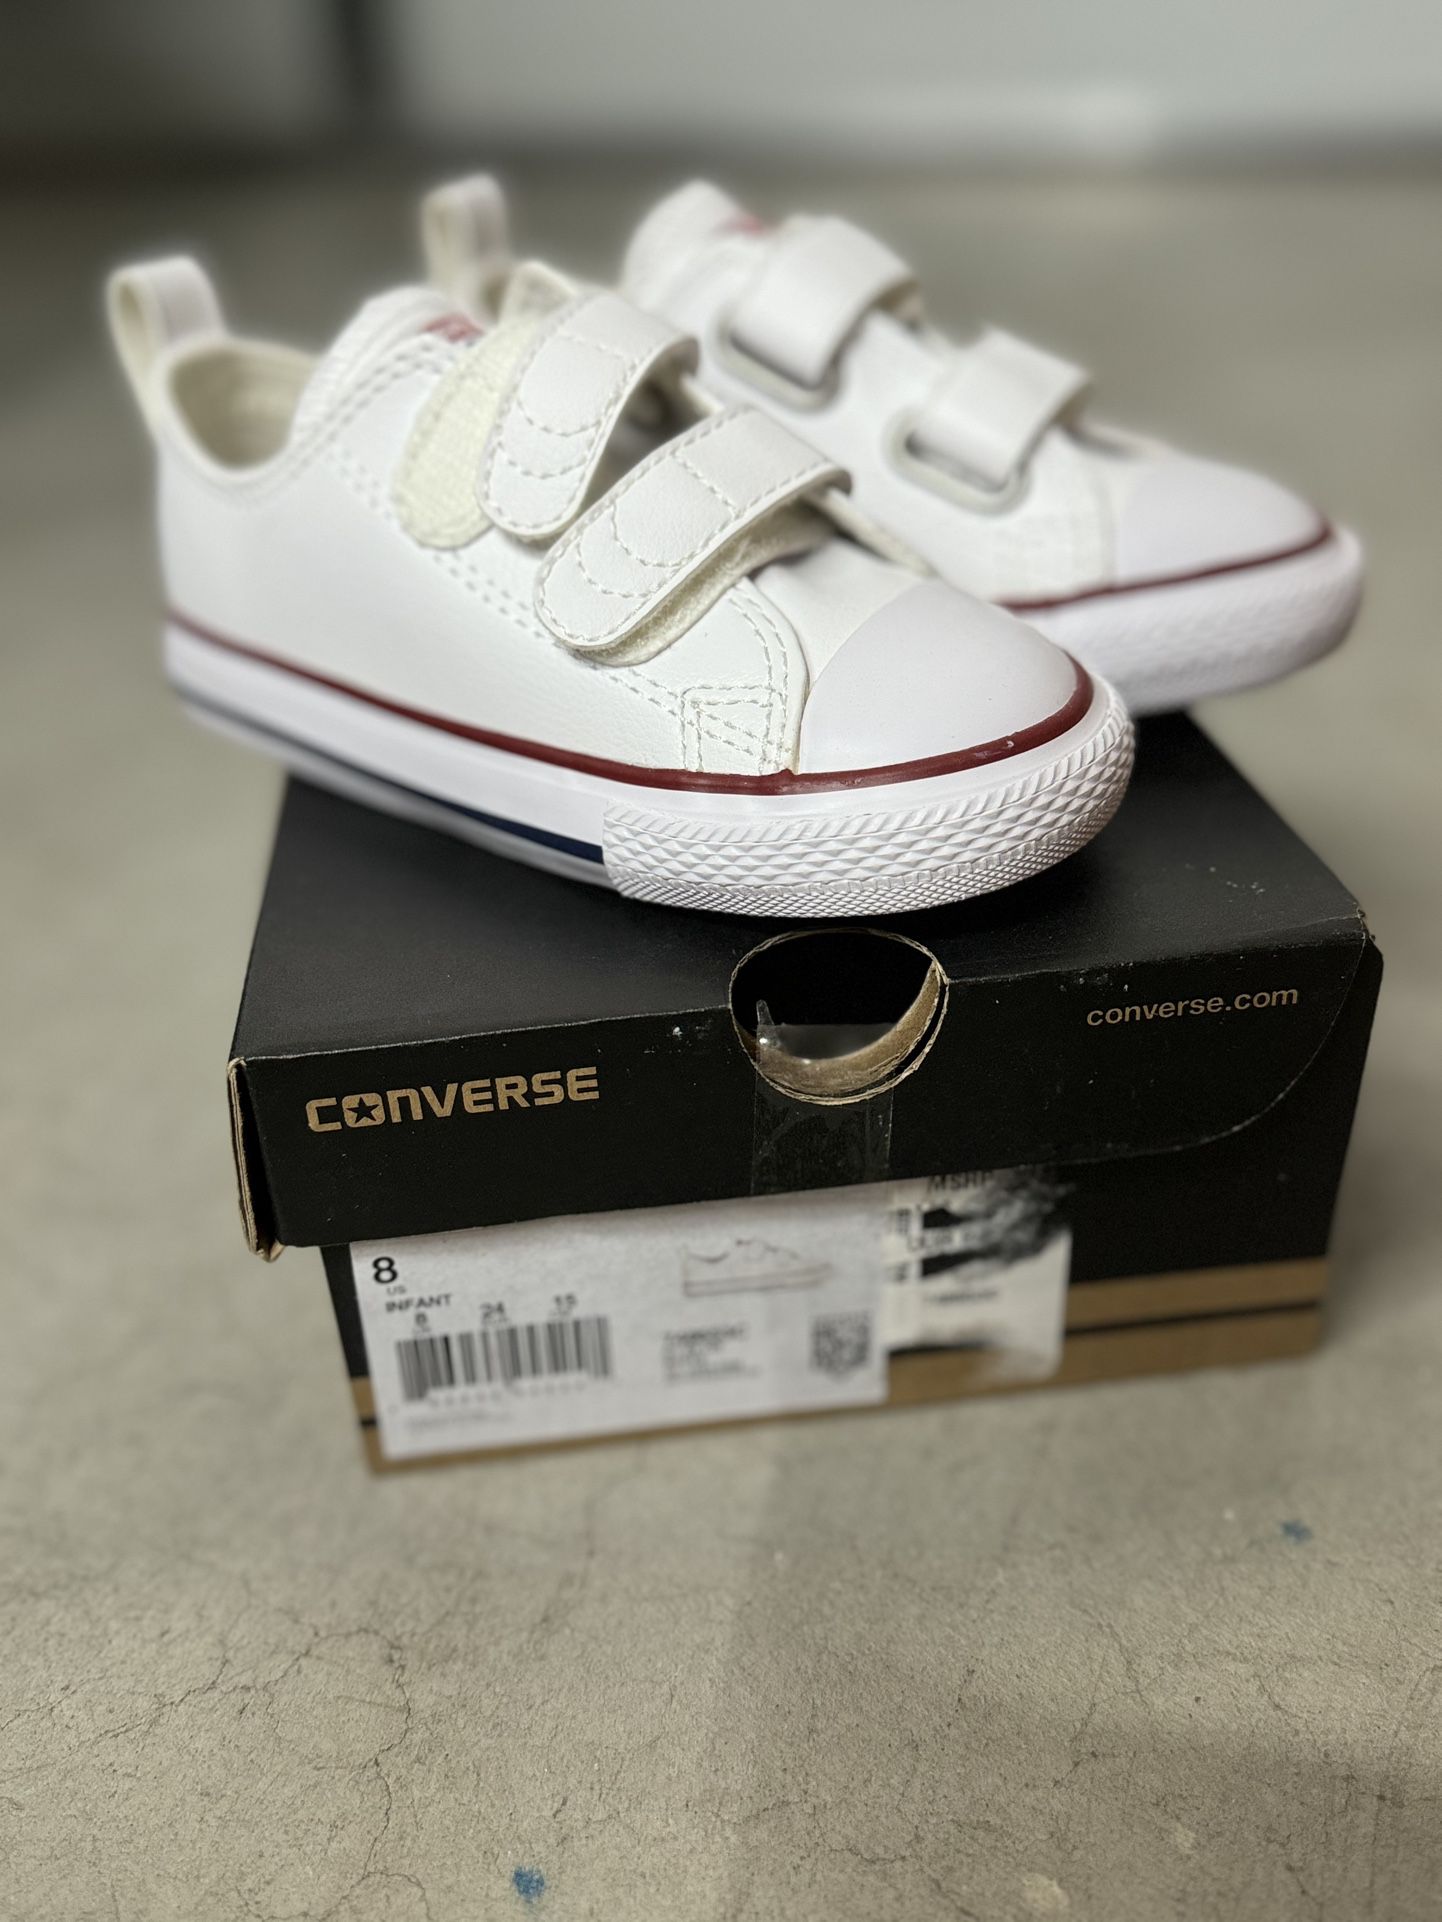 Toddler Converse Shoes Size 8 